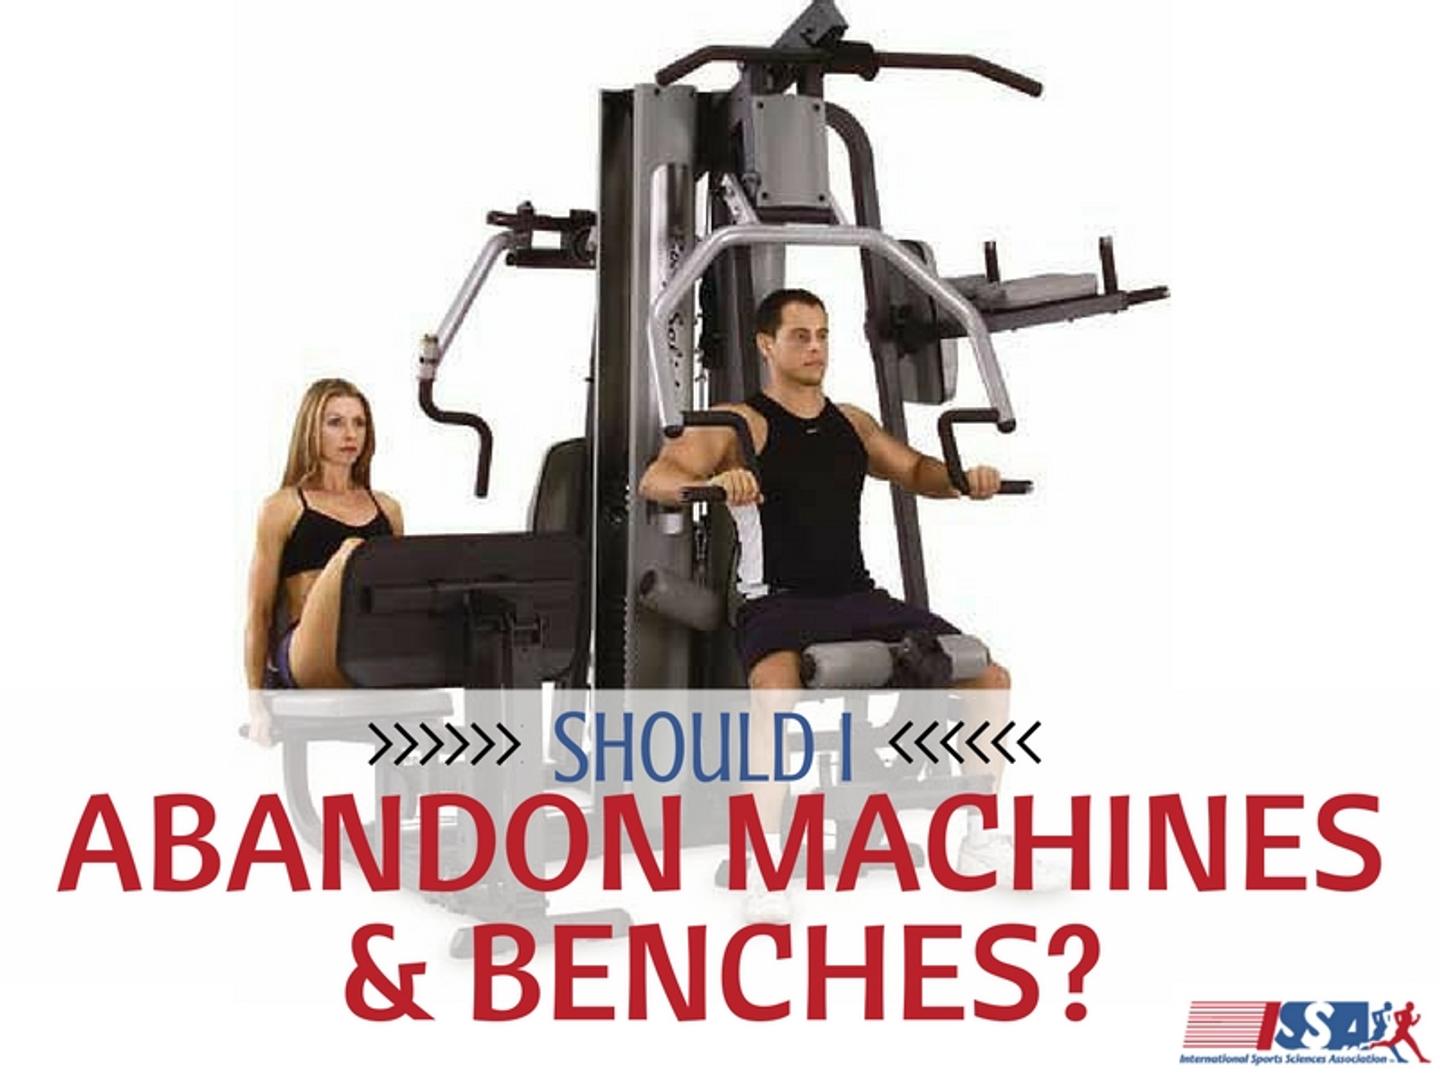 ISSA, International Sports Sciences Association, Certified Personal Trainer, ISSAonline,STAND and DELIVER!  The Lost Art and Science of Old School Weight Training,Should I abandon machines and benches?